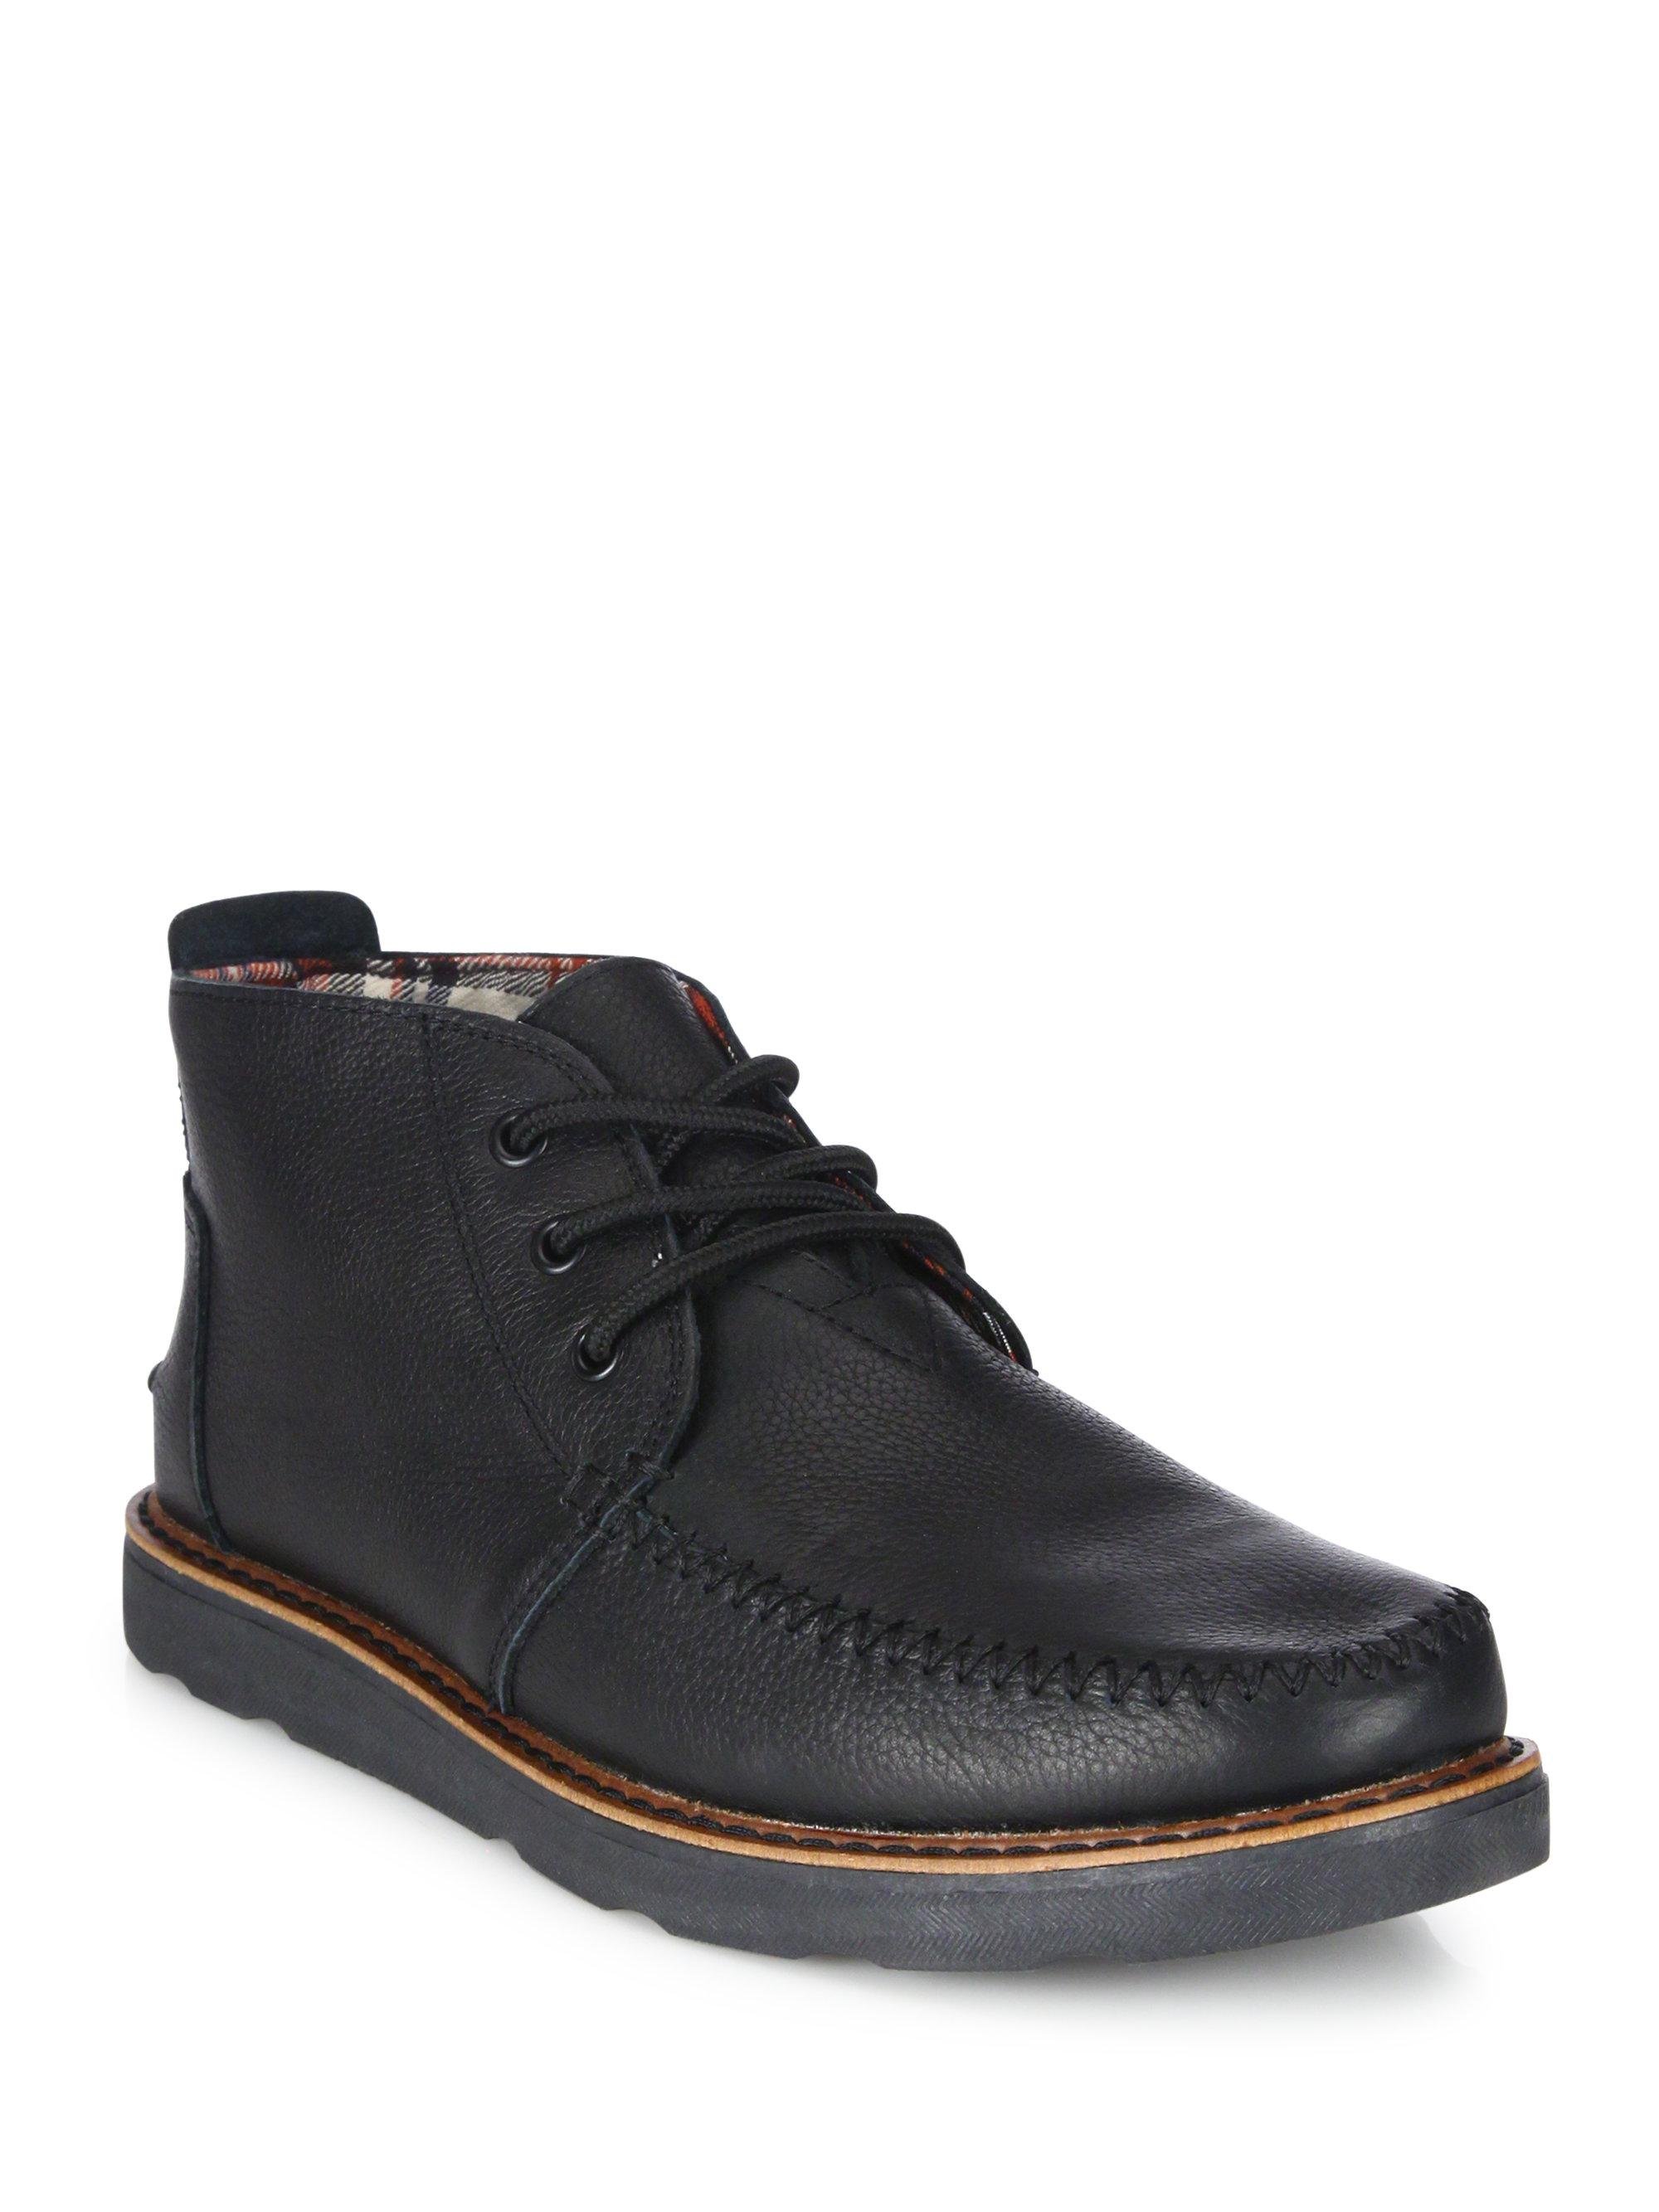 TOMS Suede Leather Chukka Boots in Black for Men - Lyst